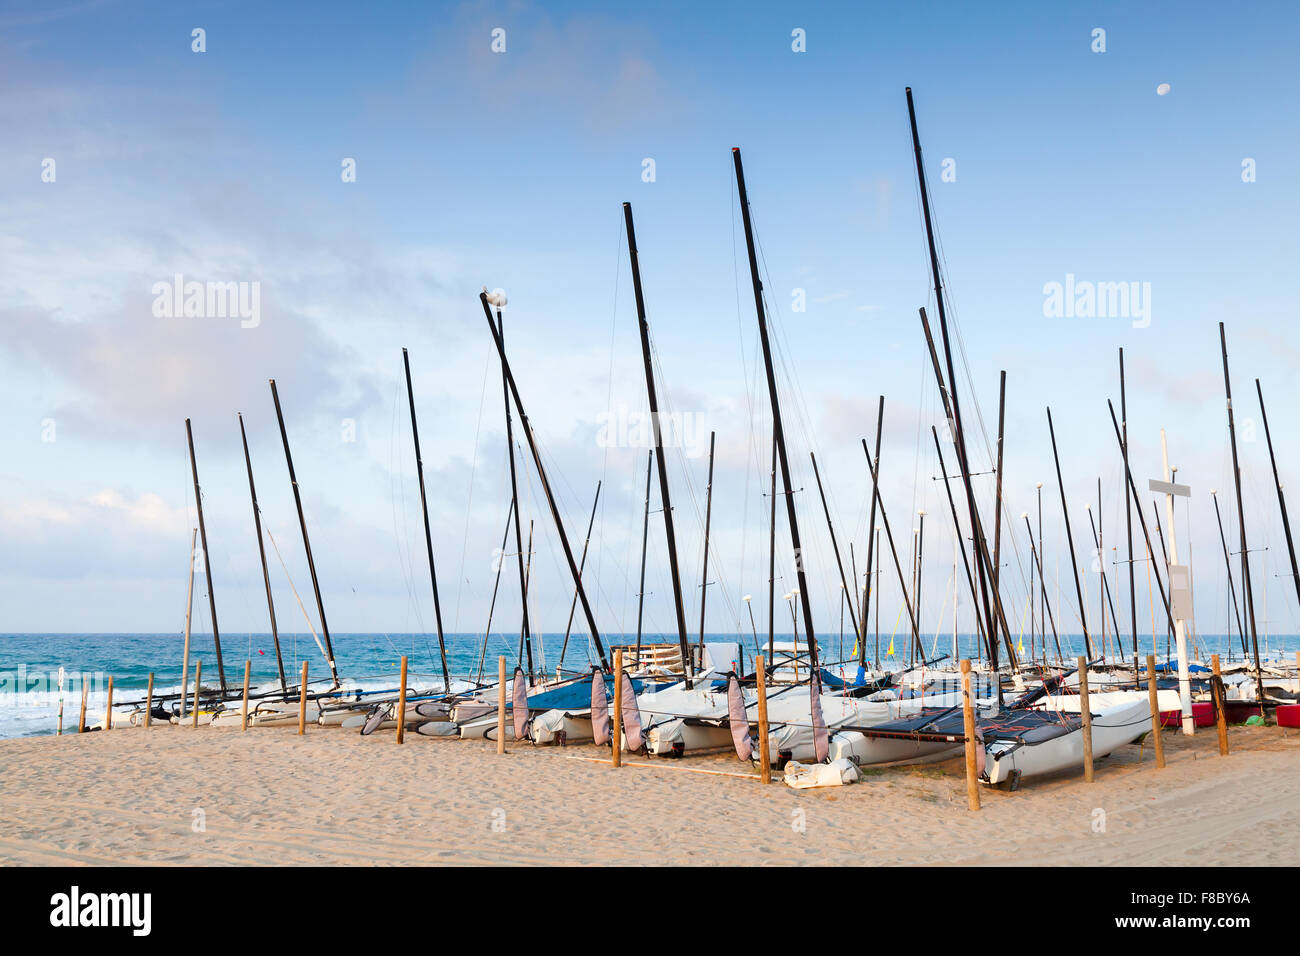 Sailing boats lay in a row on the sandy beach in Calafell, coast of Mediterranean sea, Spain Stock Photo